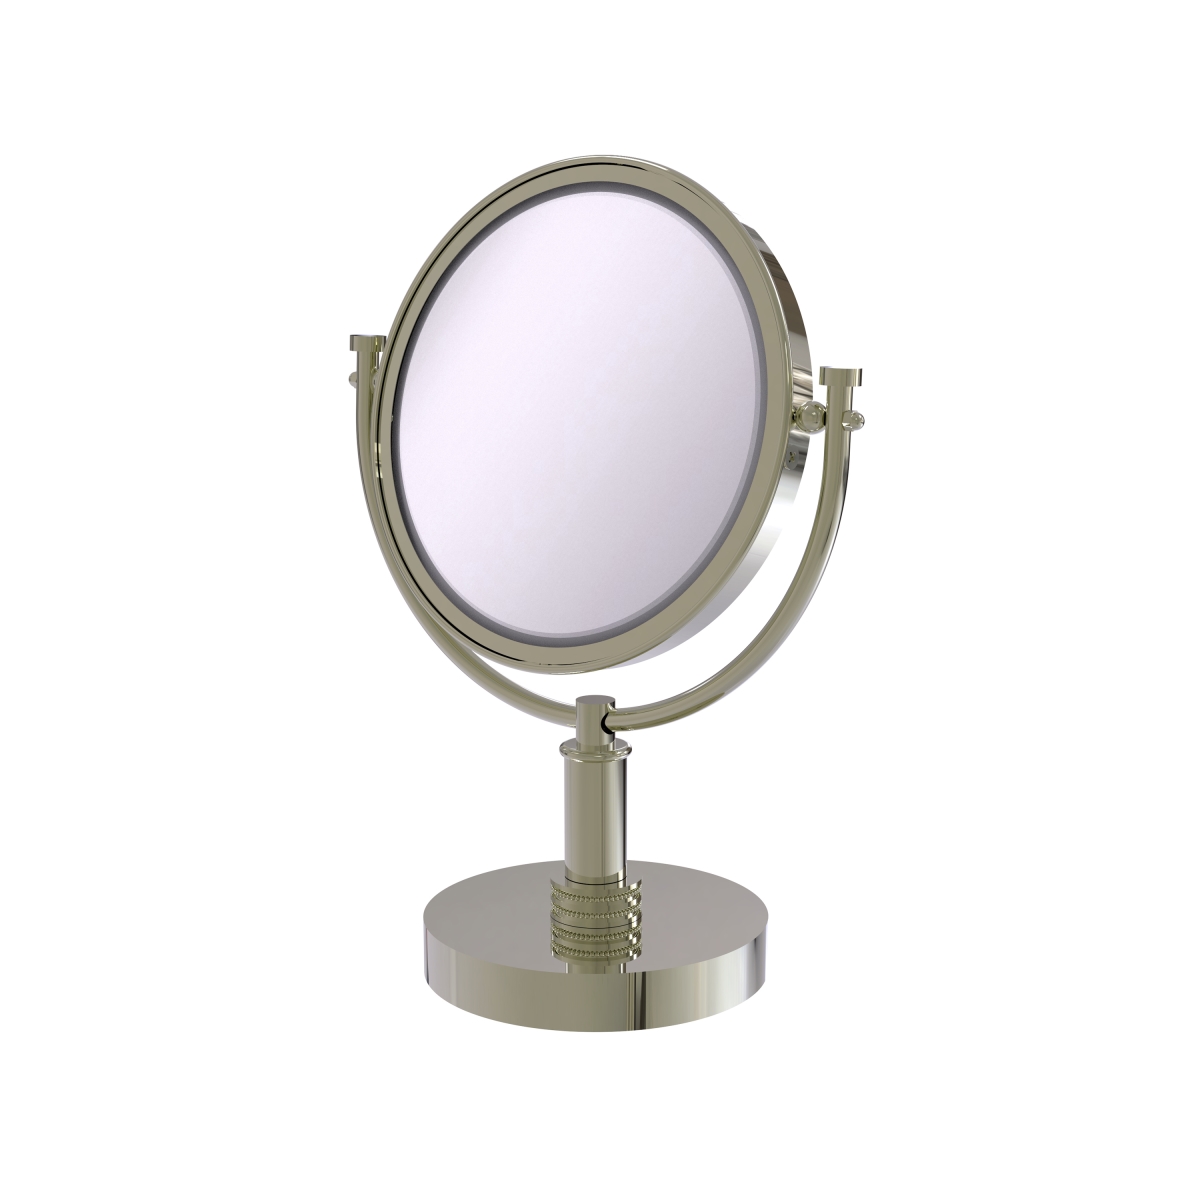 DM-4D-3X-PNI 8 in. Vanity Top Make-Up Mirror 3X Magnification, Polished Nickel - 15 x 8 x 8 in -  Allied Brass, DM-4D/3X-PNI